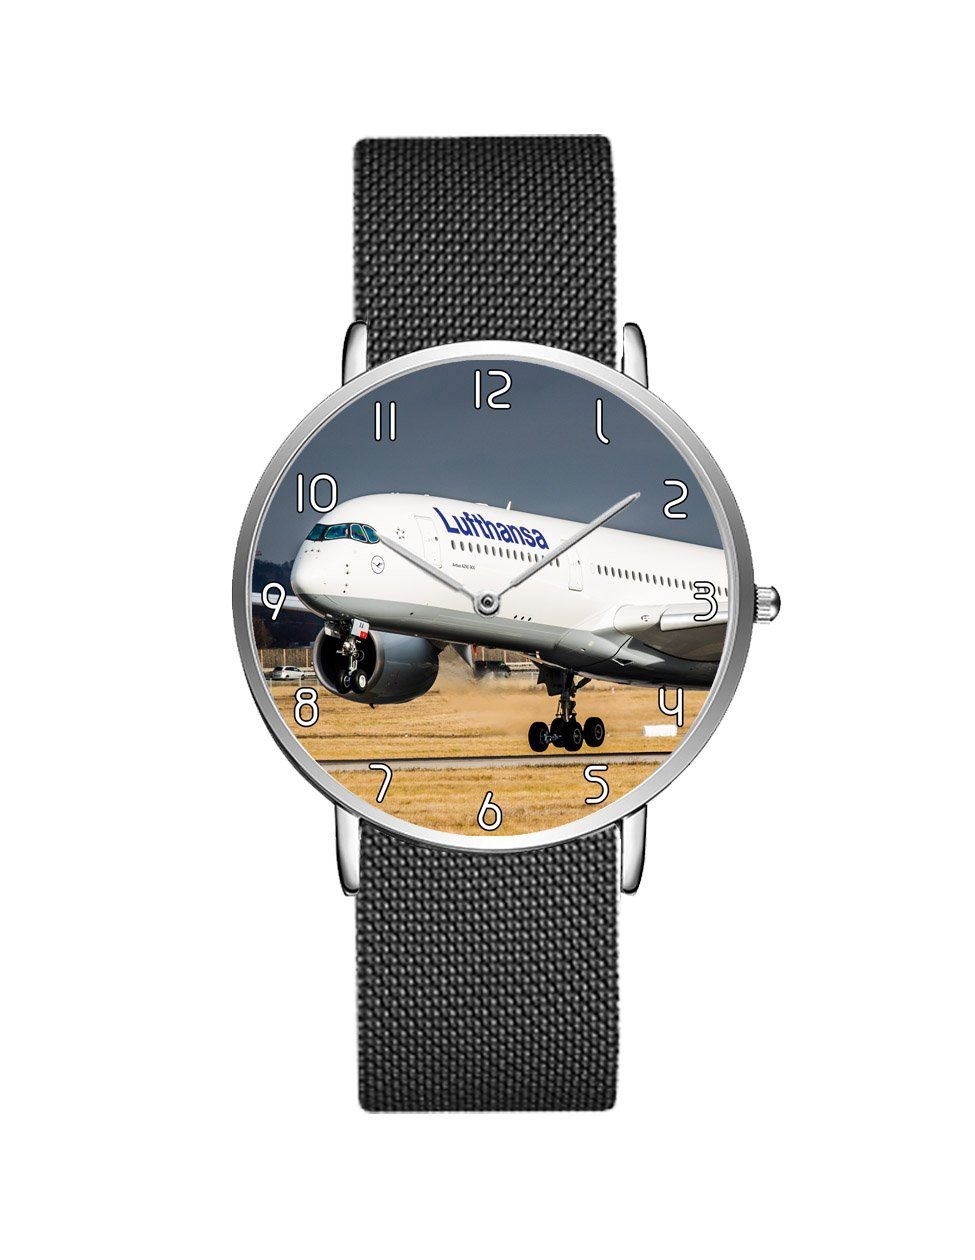 Lutfhansa A350 Printed Stainless Steel Strap Watches Aviation Shop Silver & Black Stainless Steel Strap 